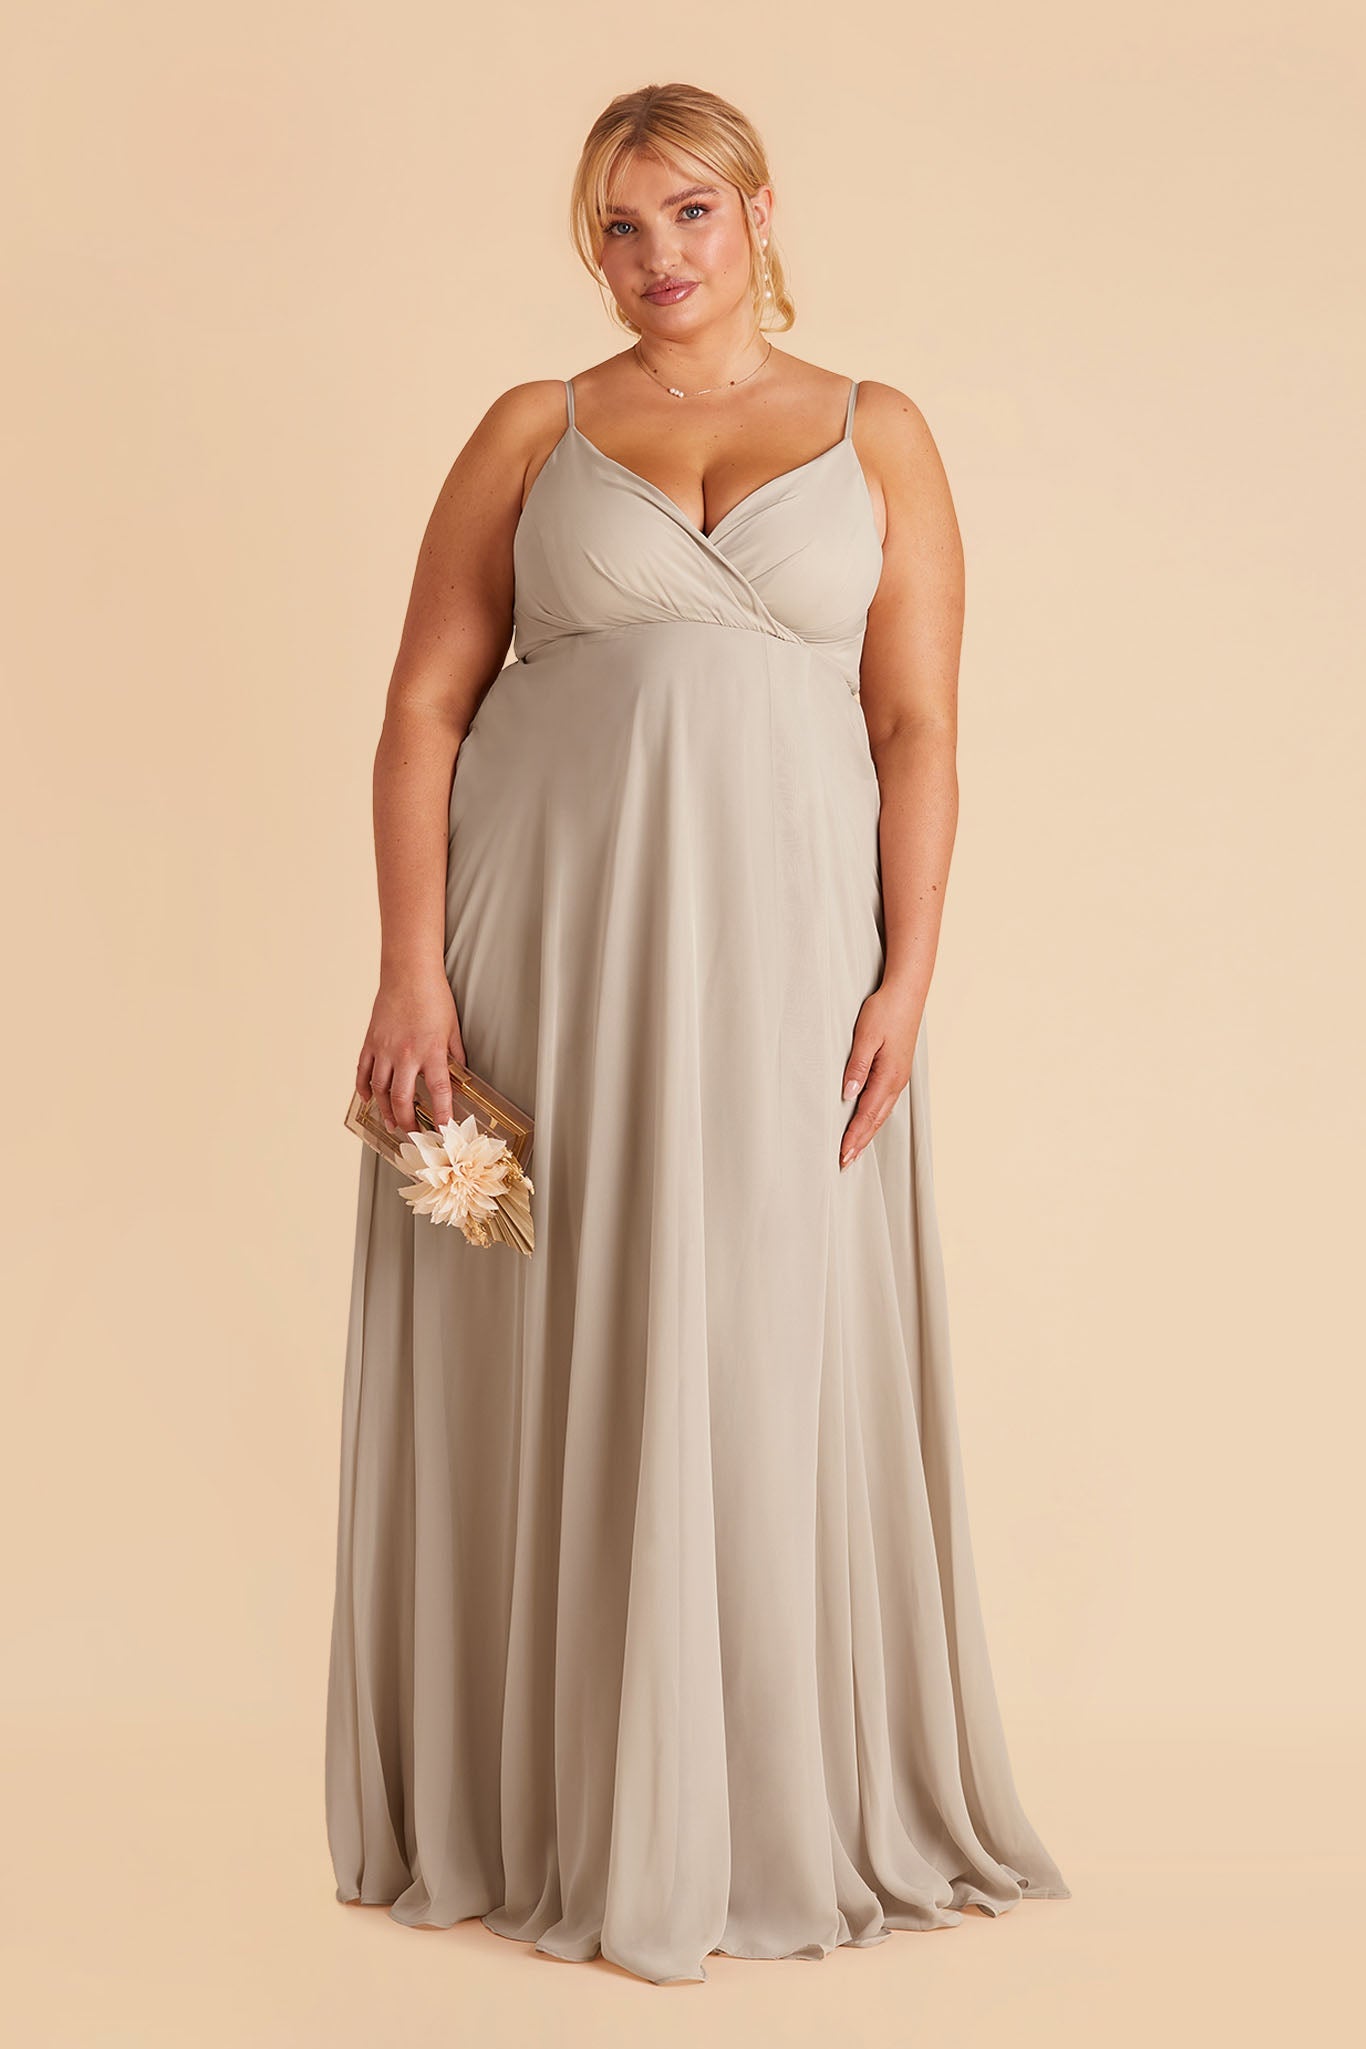 Kaia plus size bridesmaids dress in neutral champagne chiffon by Birdy Grey, front view